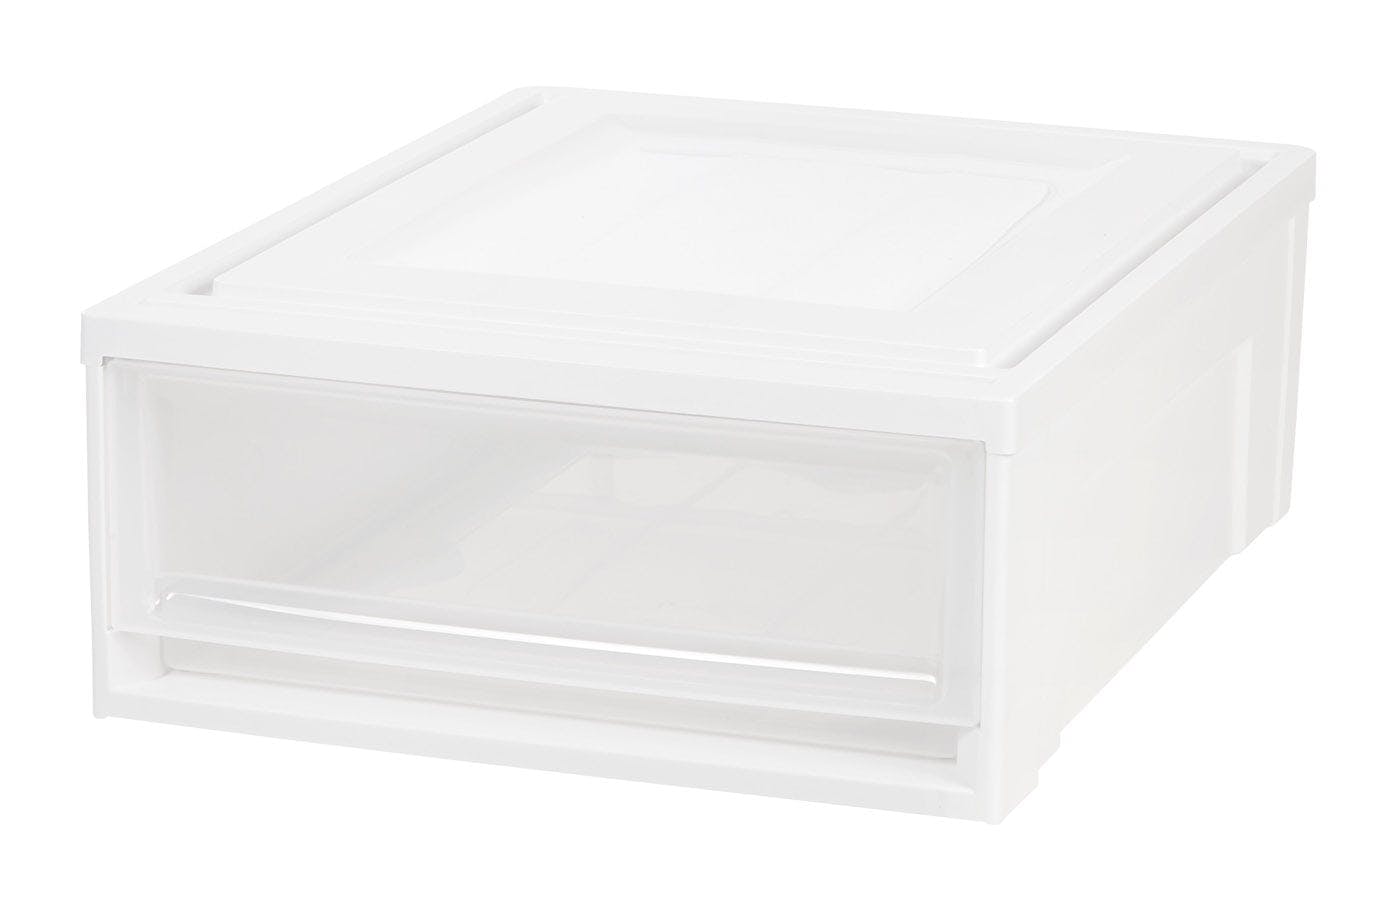 Modular Clear Plastic Stackable Storage Box Drawer 20"x14"